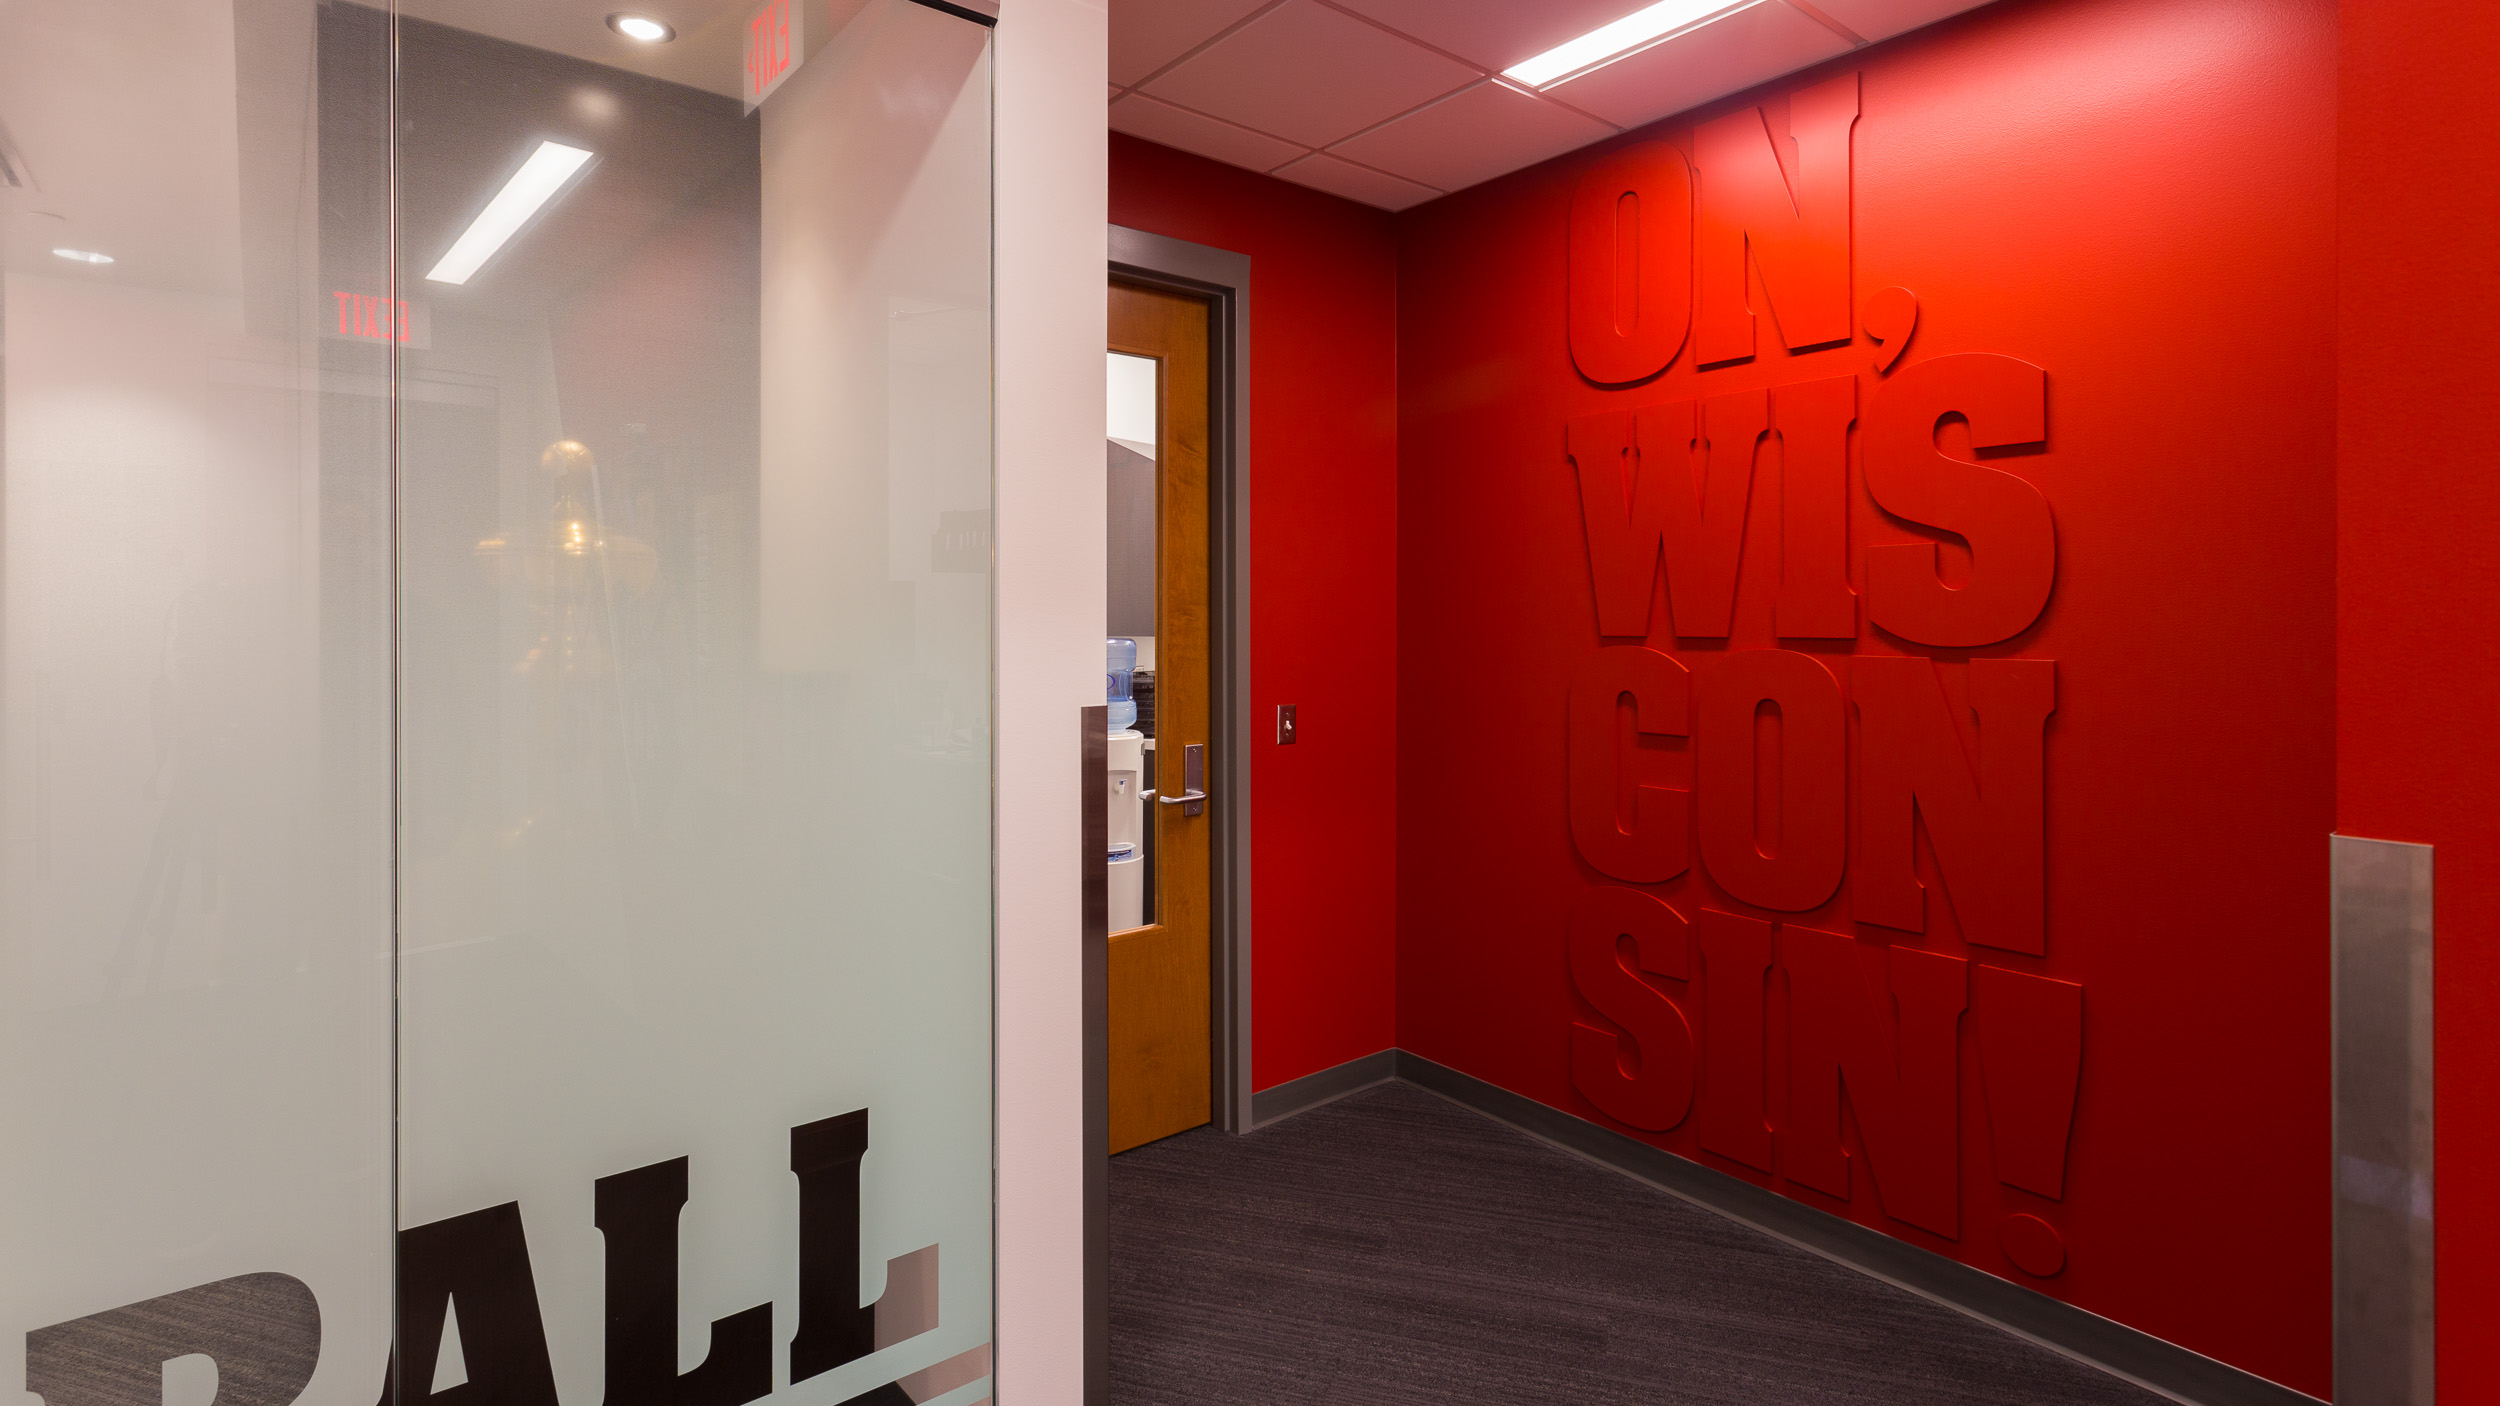 University of Wisconsin - Basketball Offices Acrylic Tagline Feature Wall